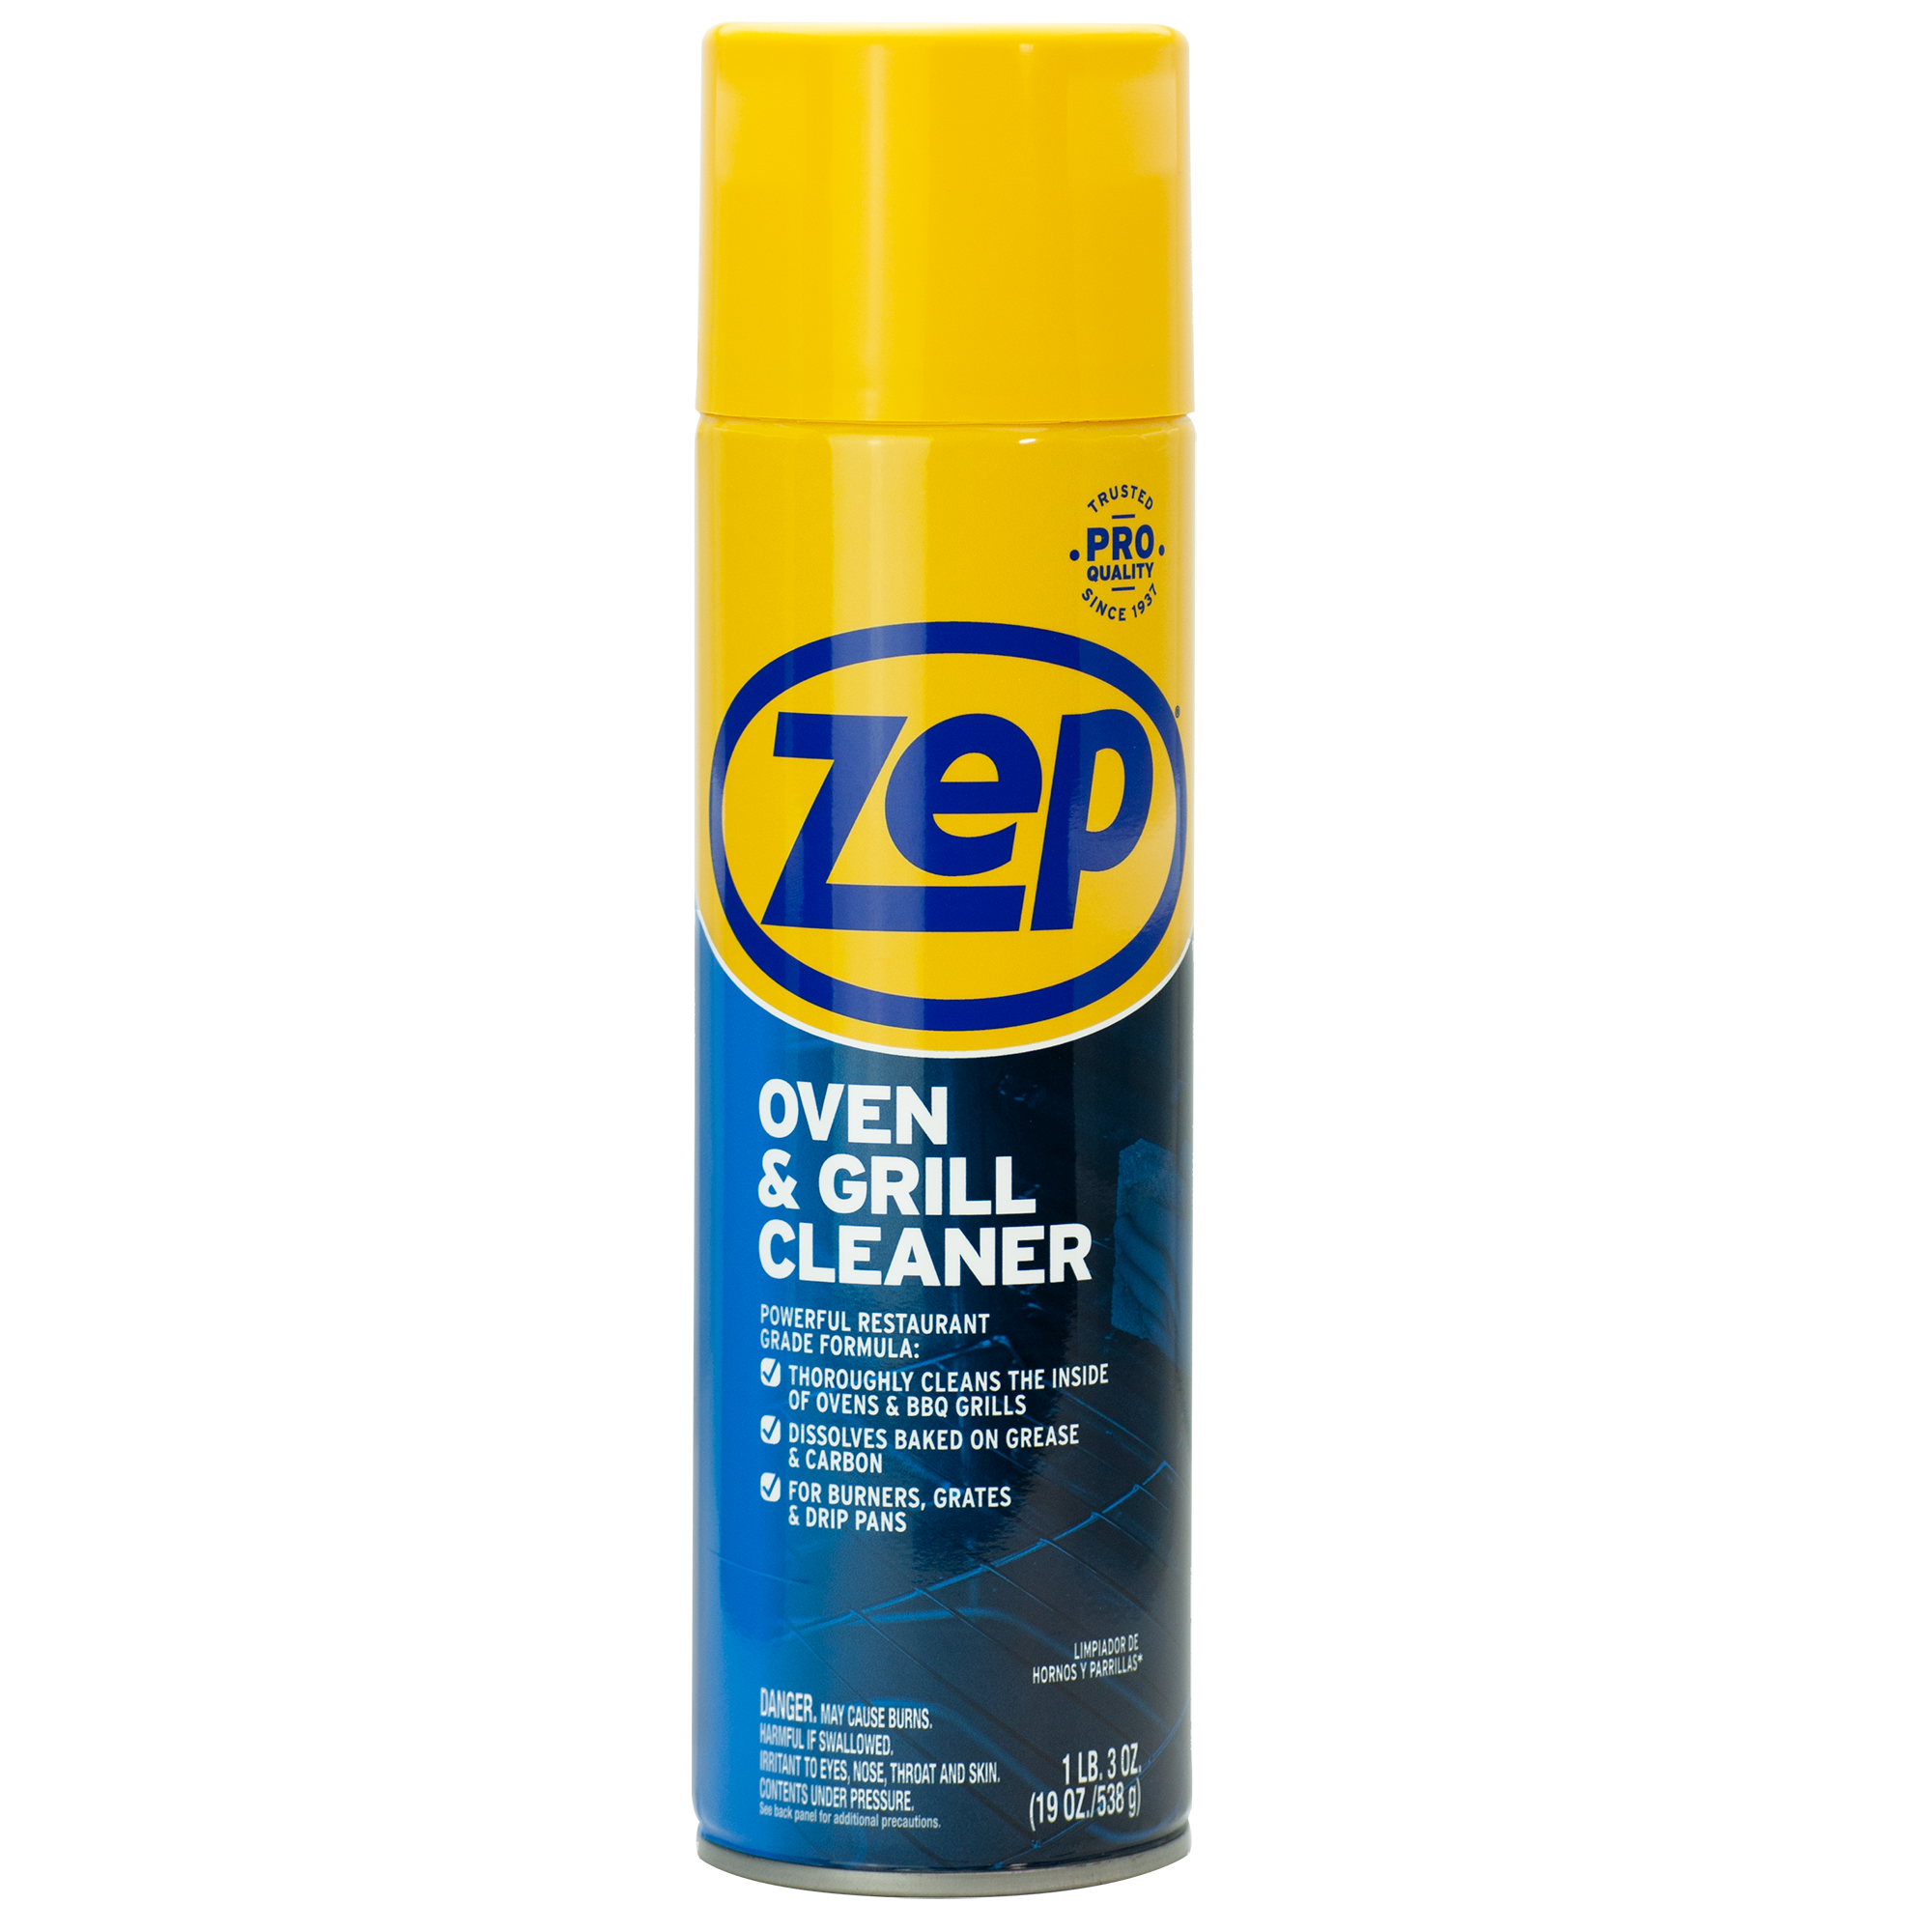 De-Greez Oven and Stove Cleaner